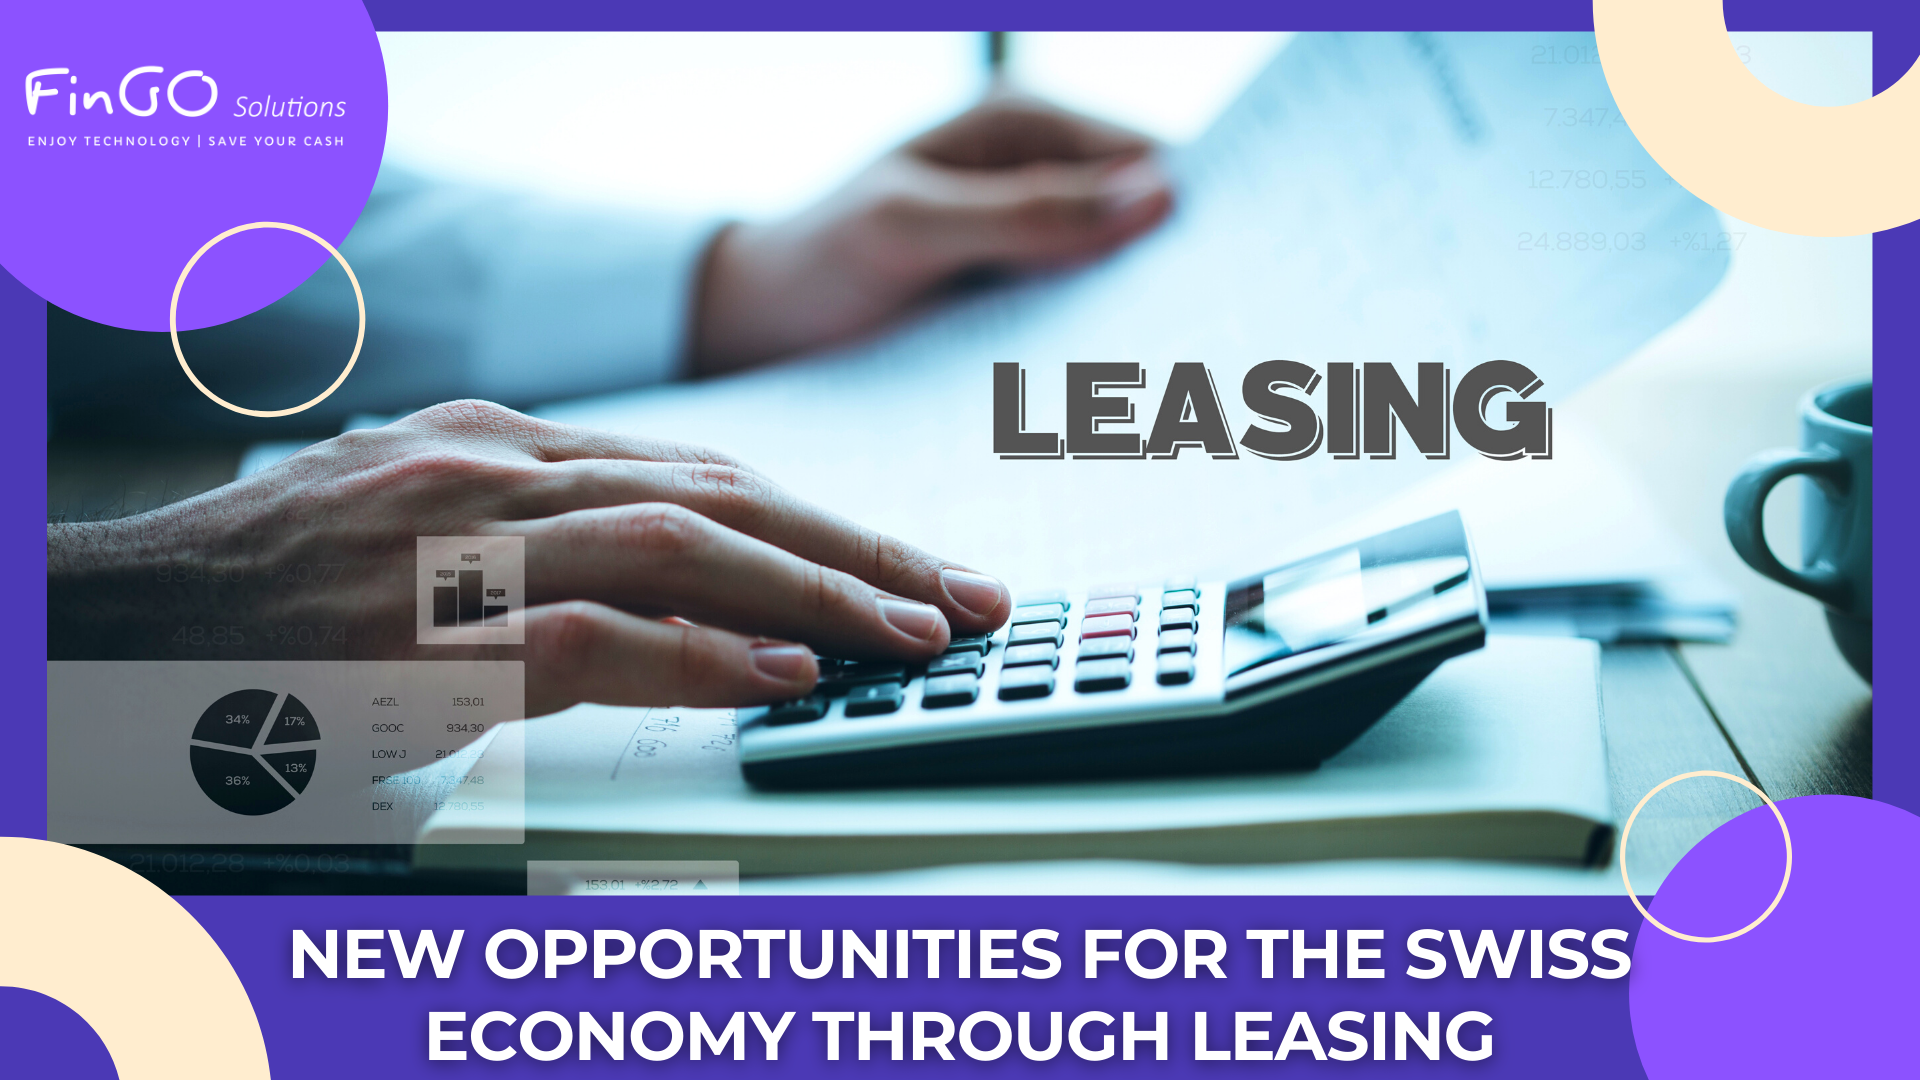 New opportunities for the Swiss economy through leasing